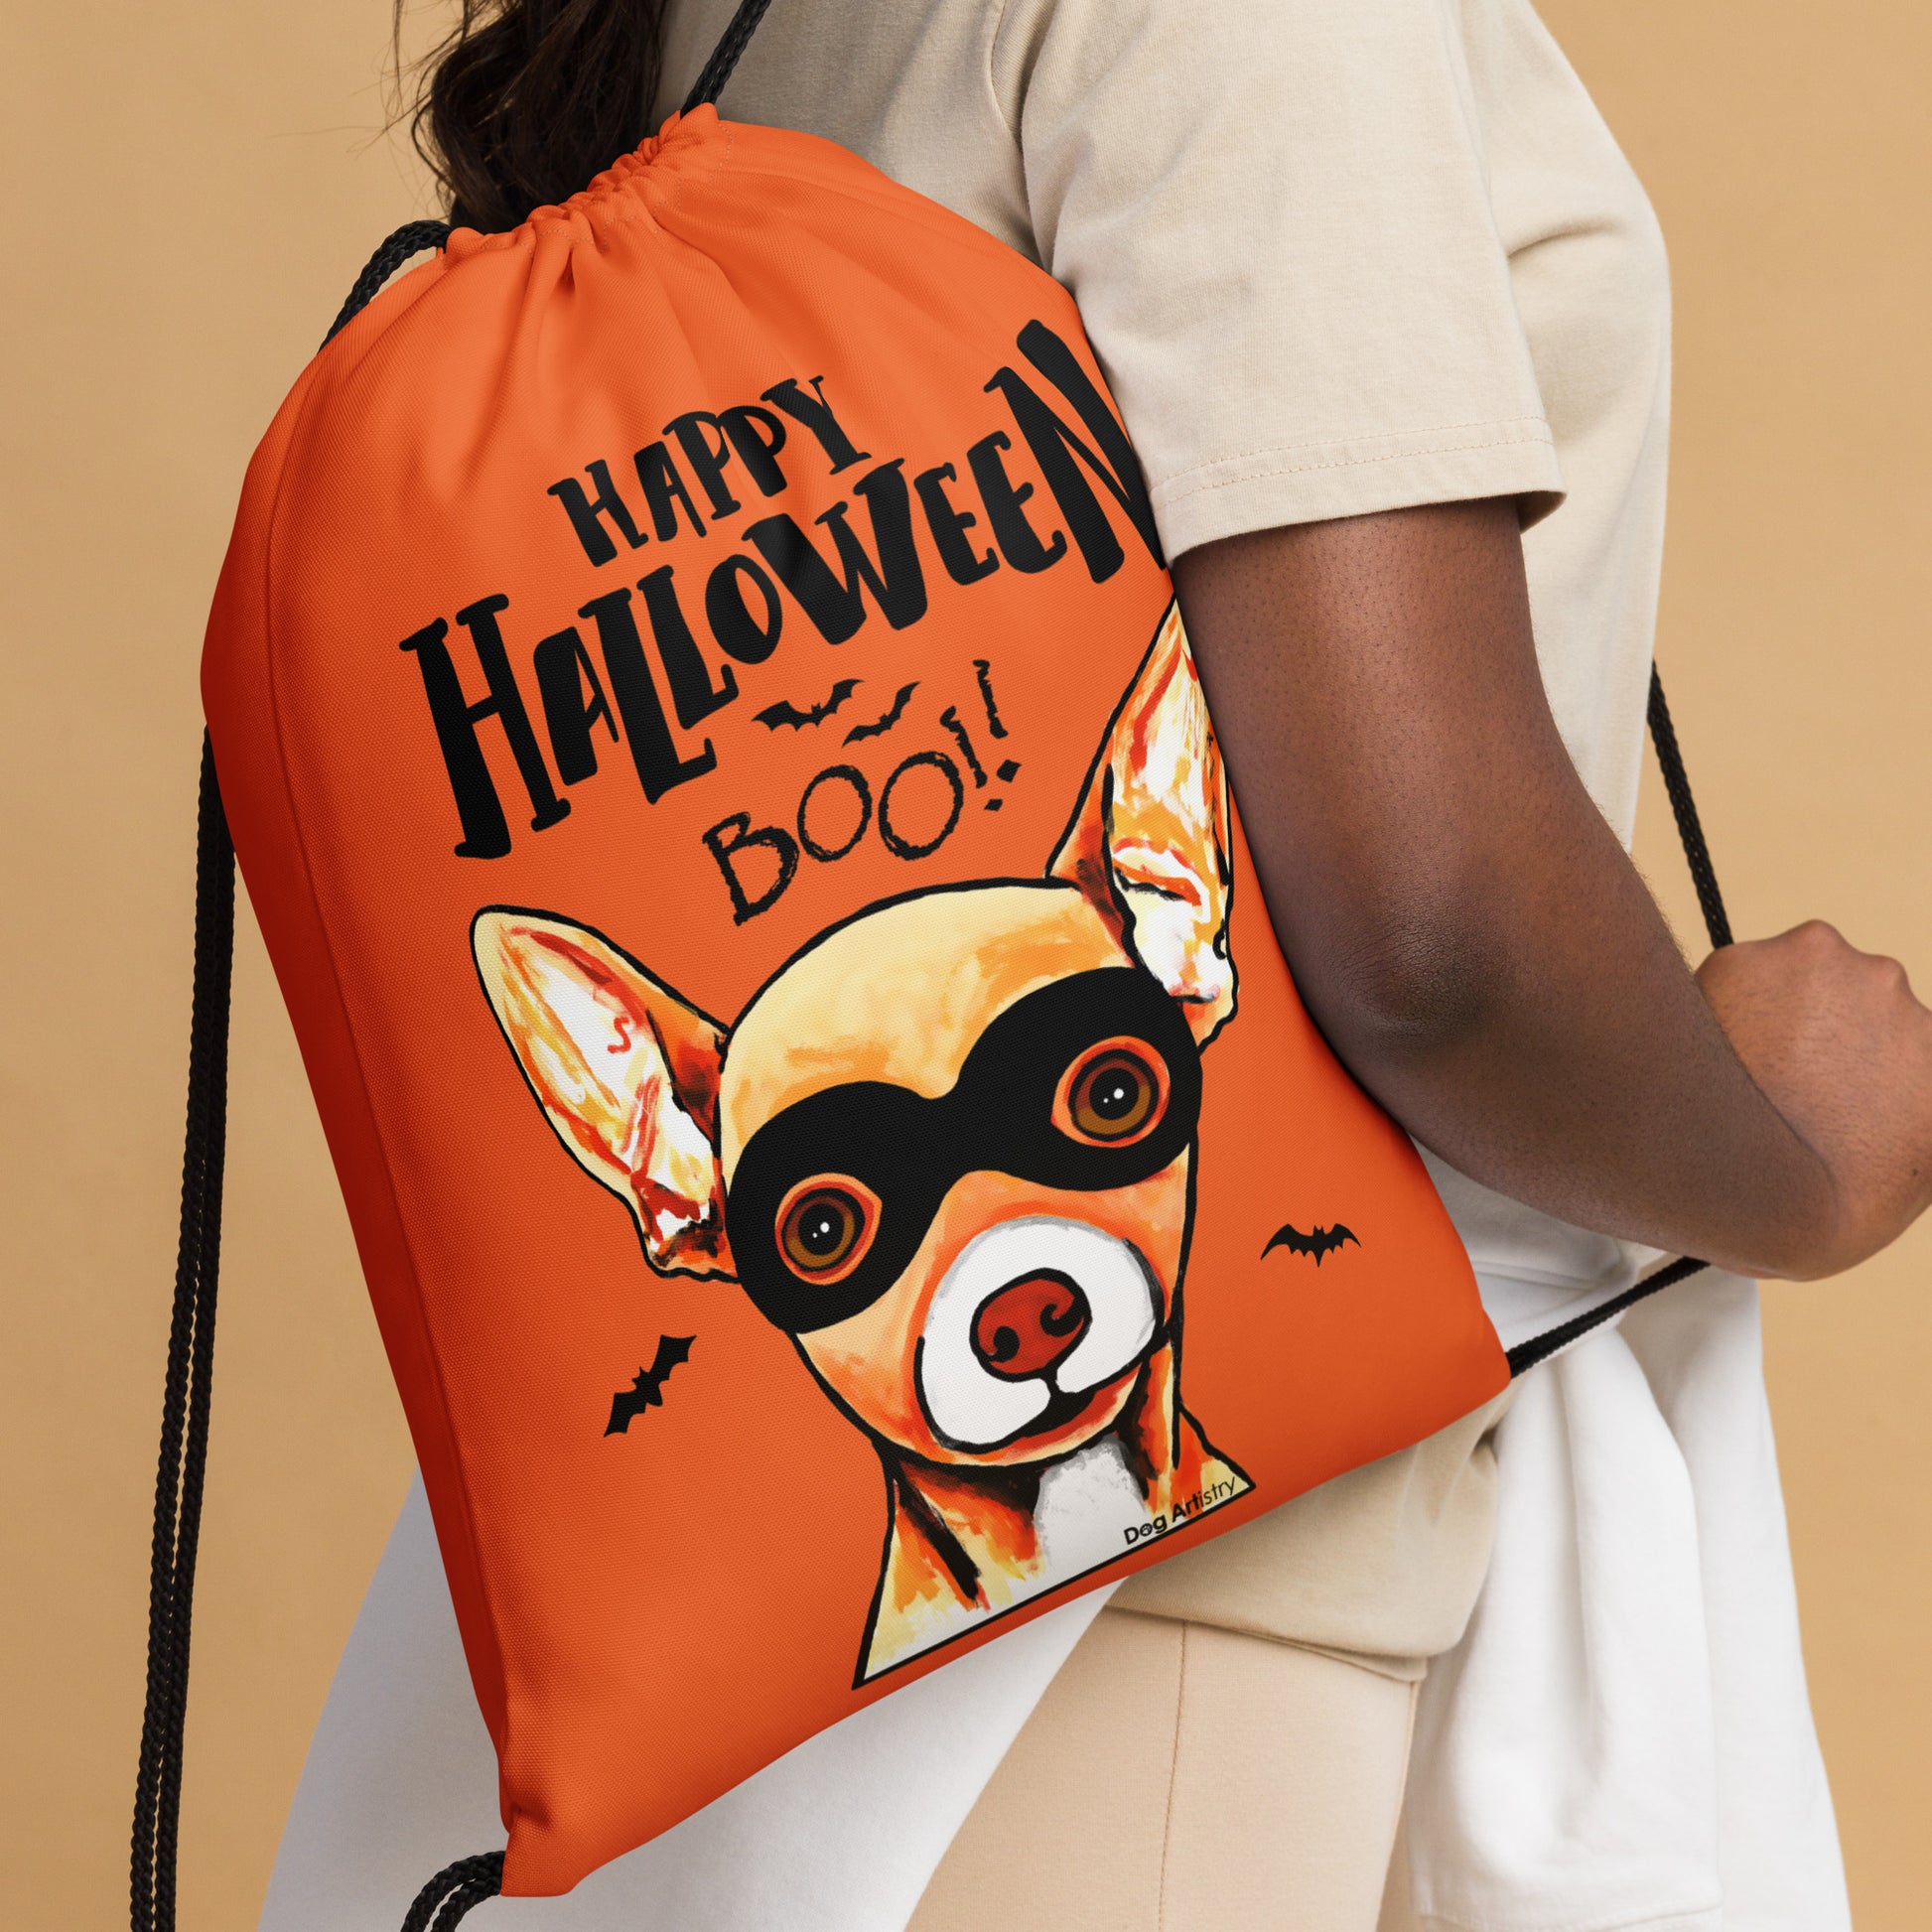 Happy Halloween Chihuahua wearing mask Orange drawstring bag by Dog Artistry Halloween candy bag. Close up.